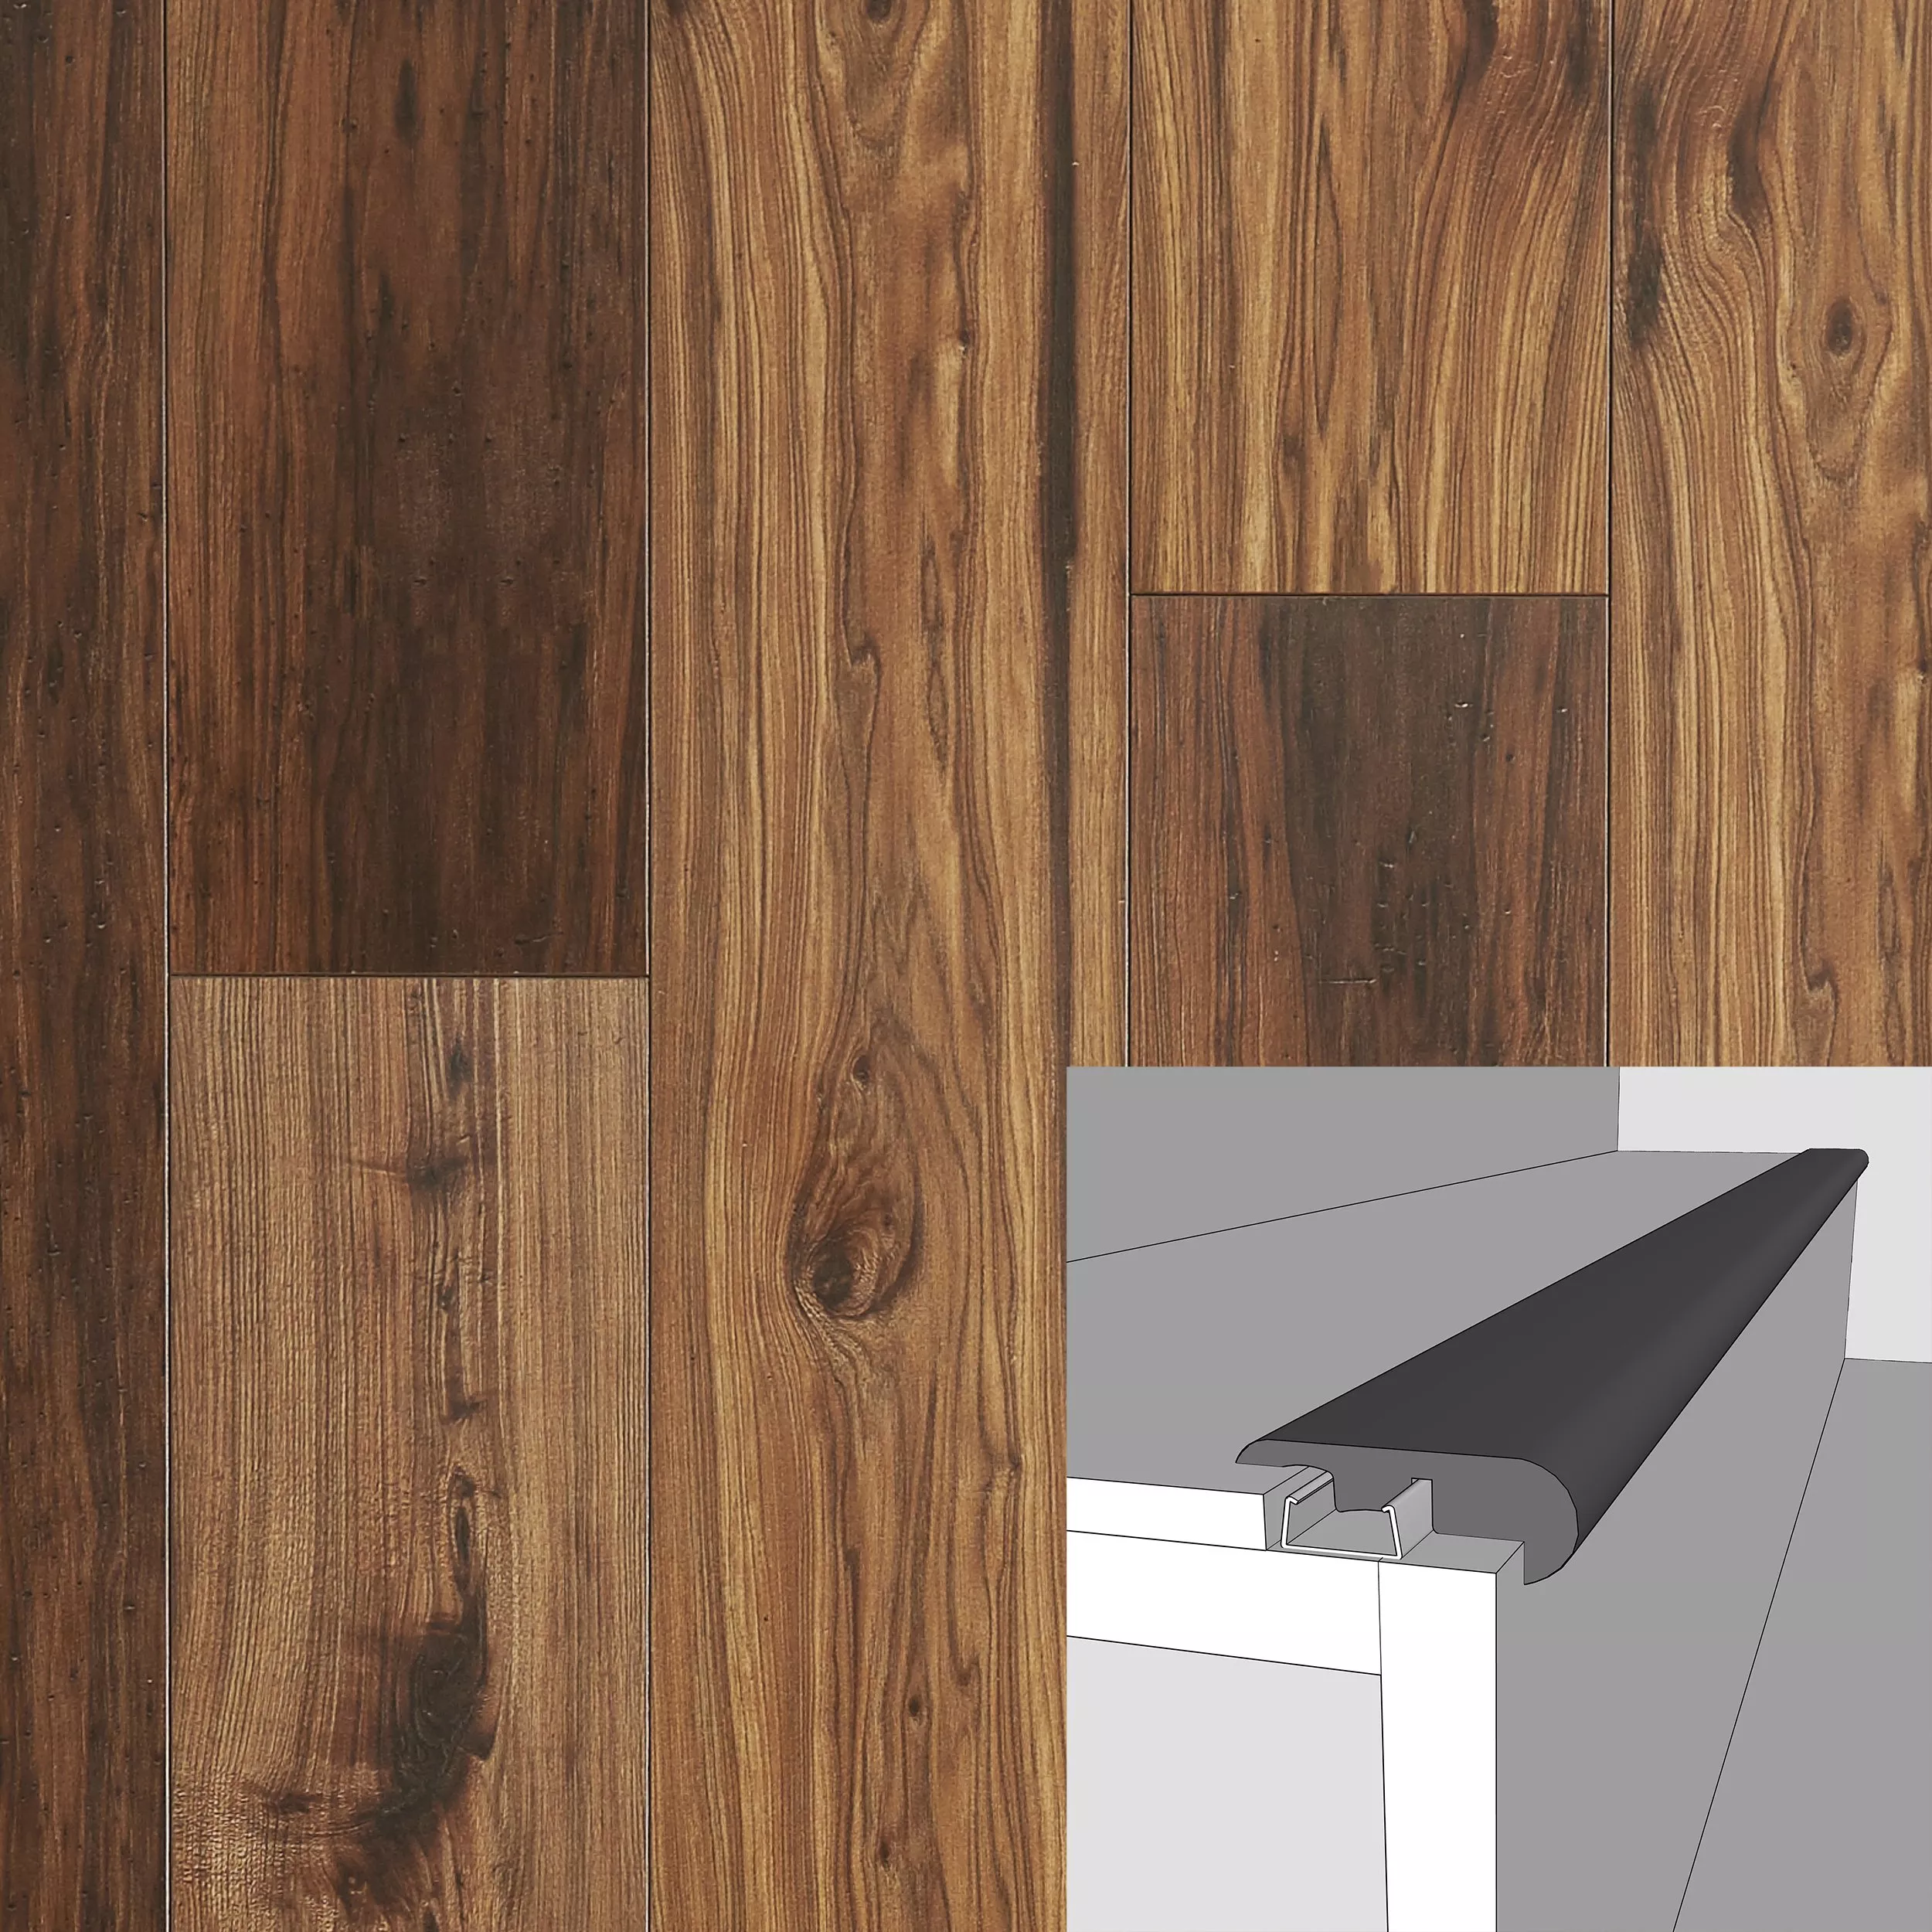 Belle Isle 94in. Laminate Overlapping Stair Nose